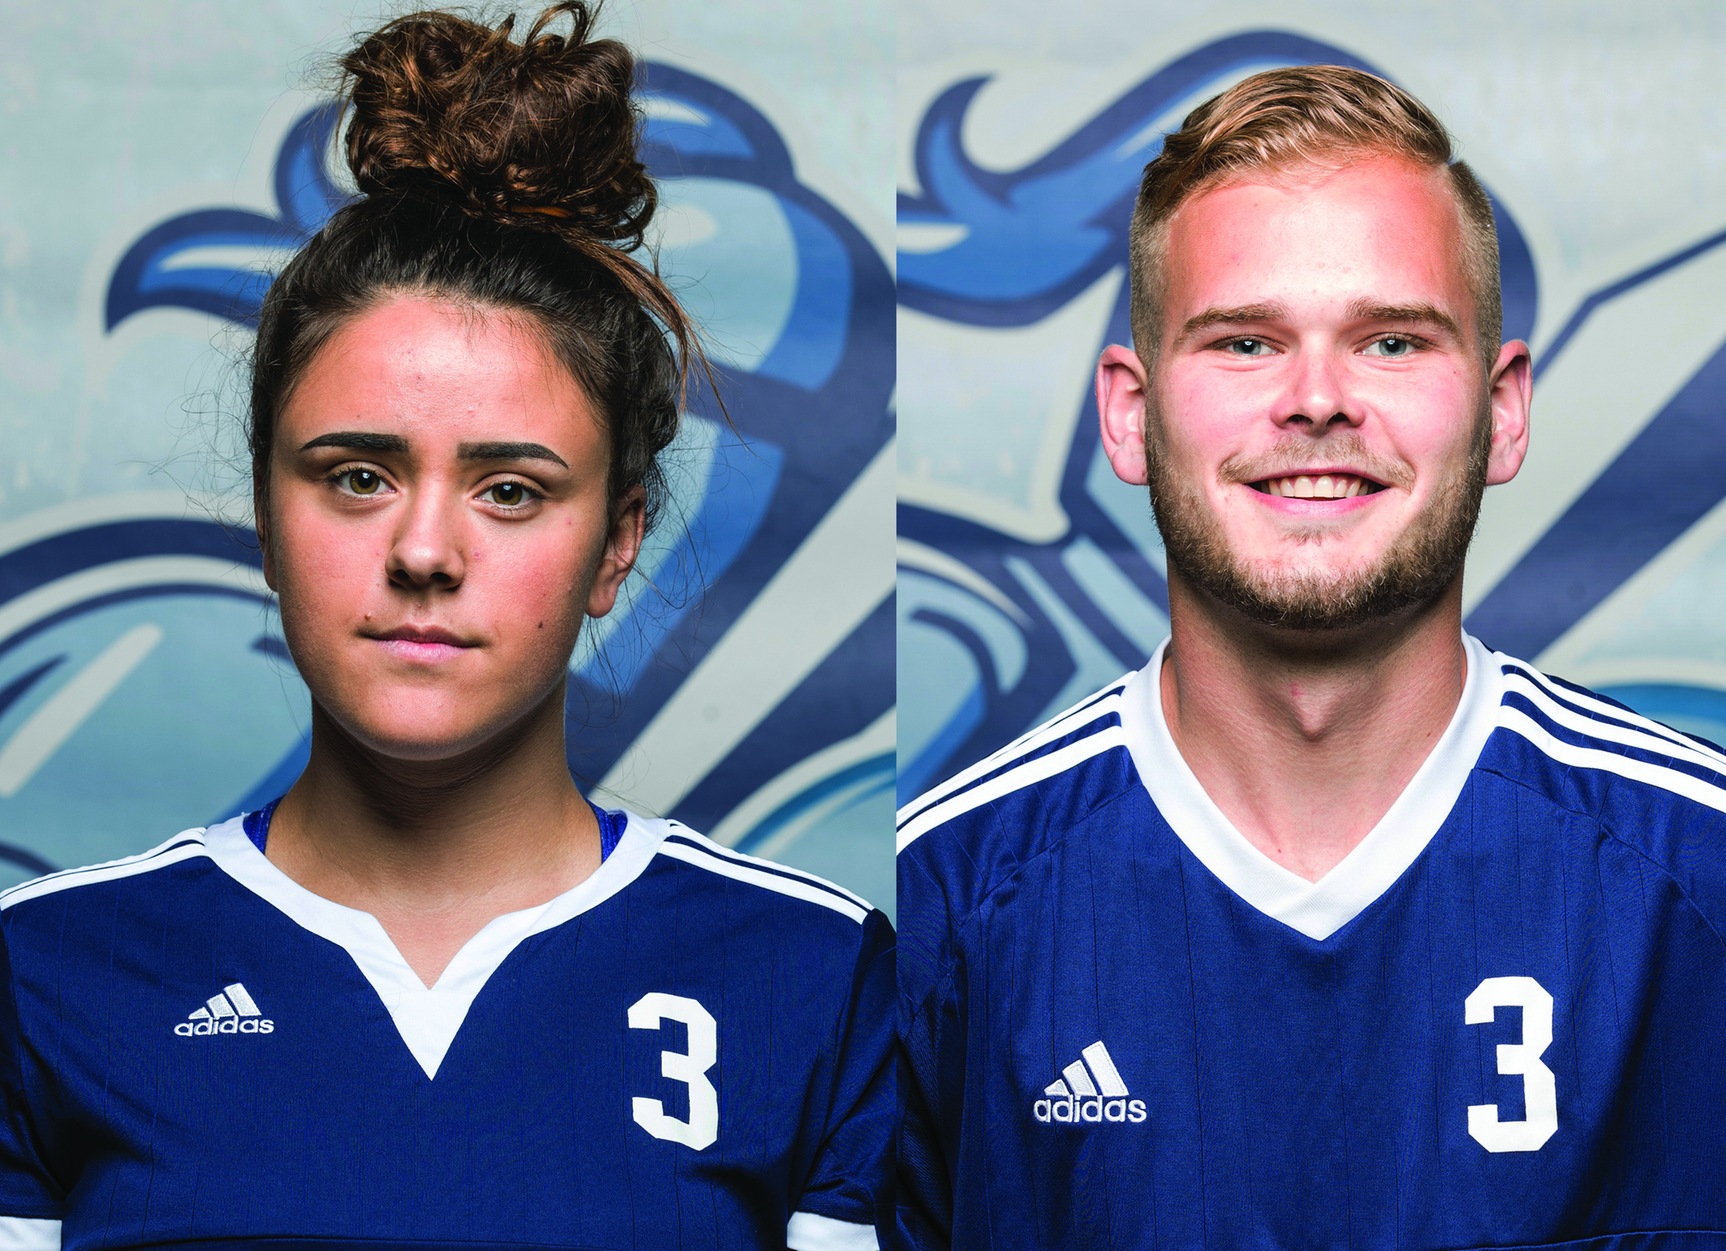 NEWS: Currie and Hebert named athletes of the week